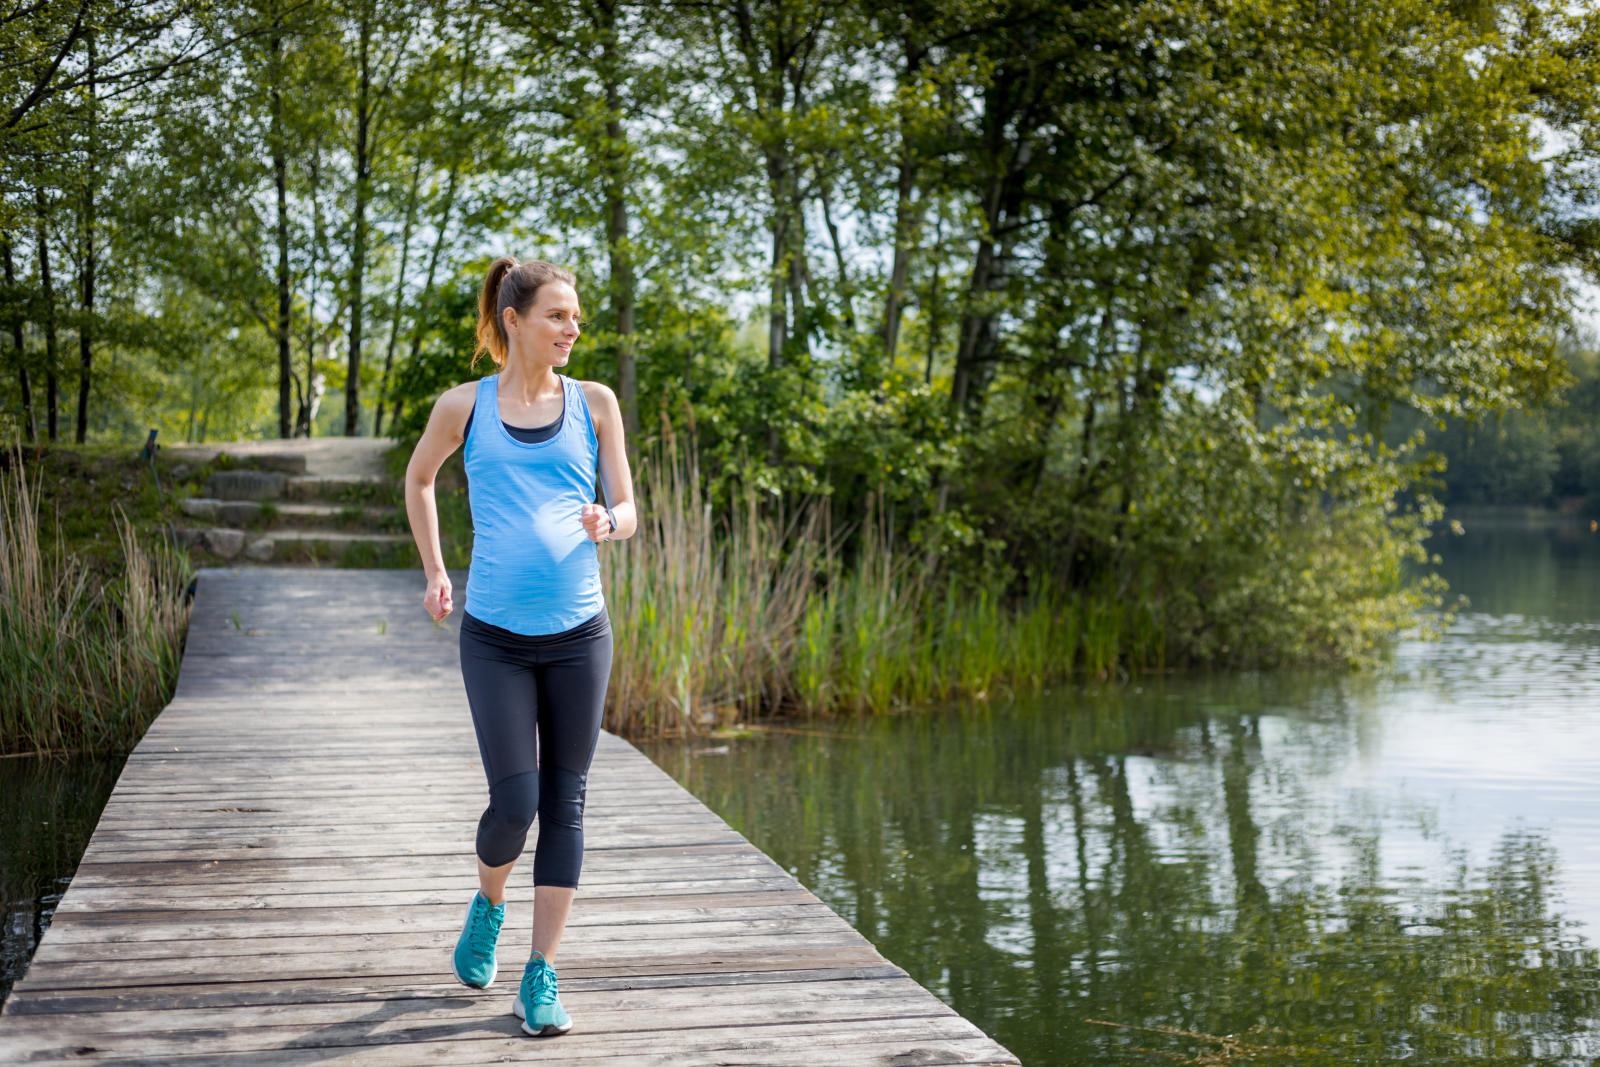 woman with visible pregnancy belly jogging in athletic gear outdoors across wooden boardwalk on lake